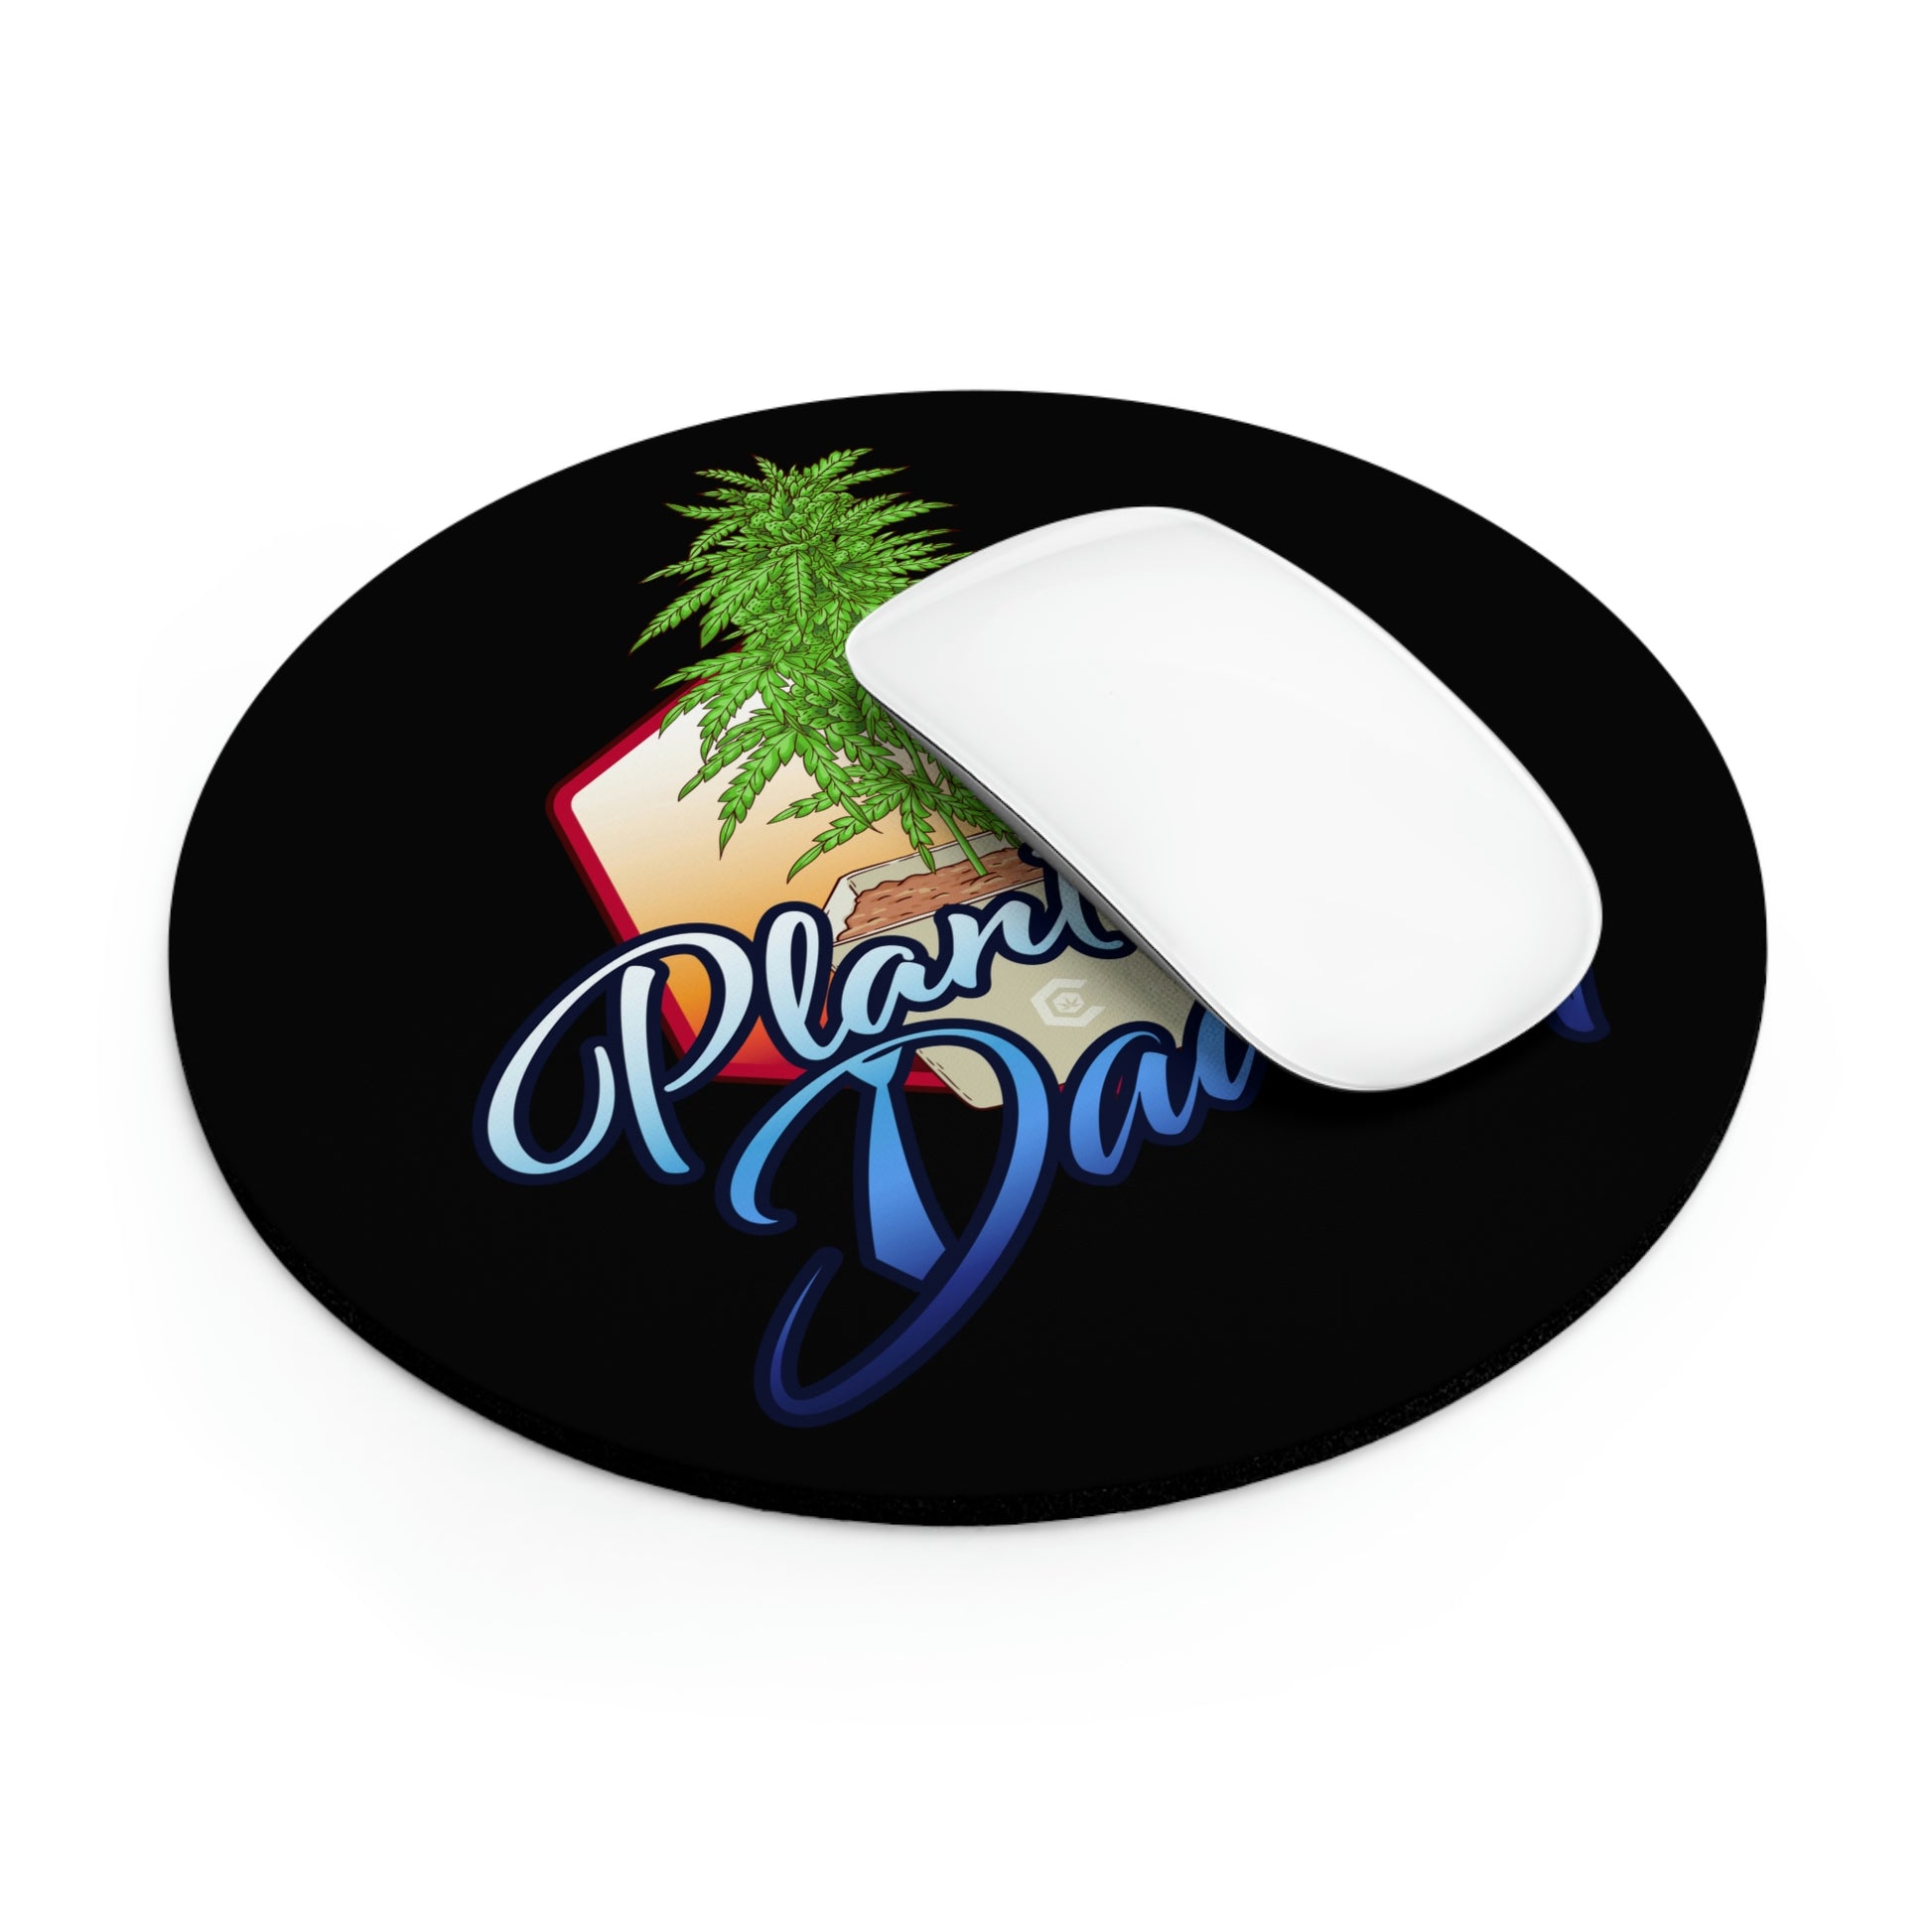 This view shows a great angle of the Plant Daddy Cannabis Mouse Pad in use for the viewer.